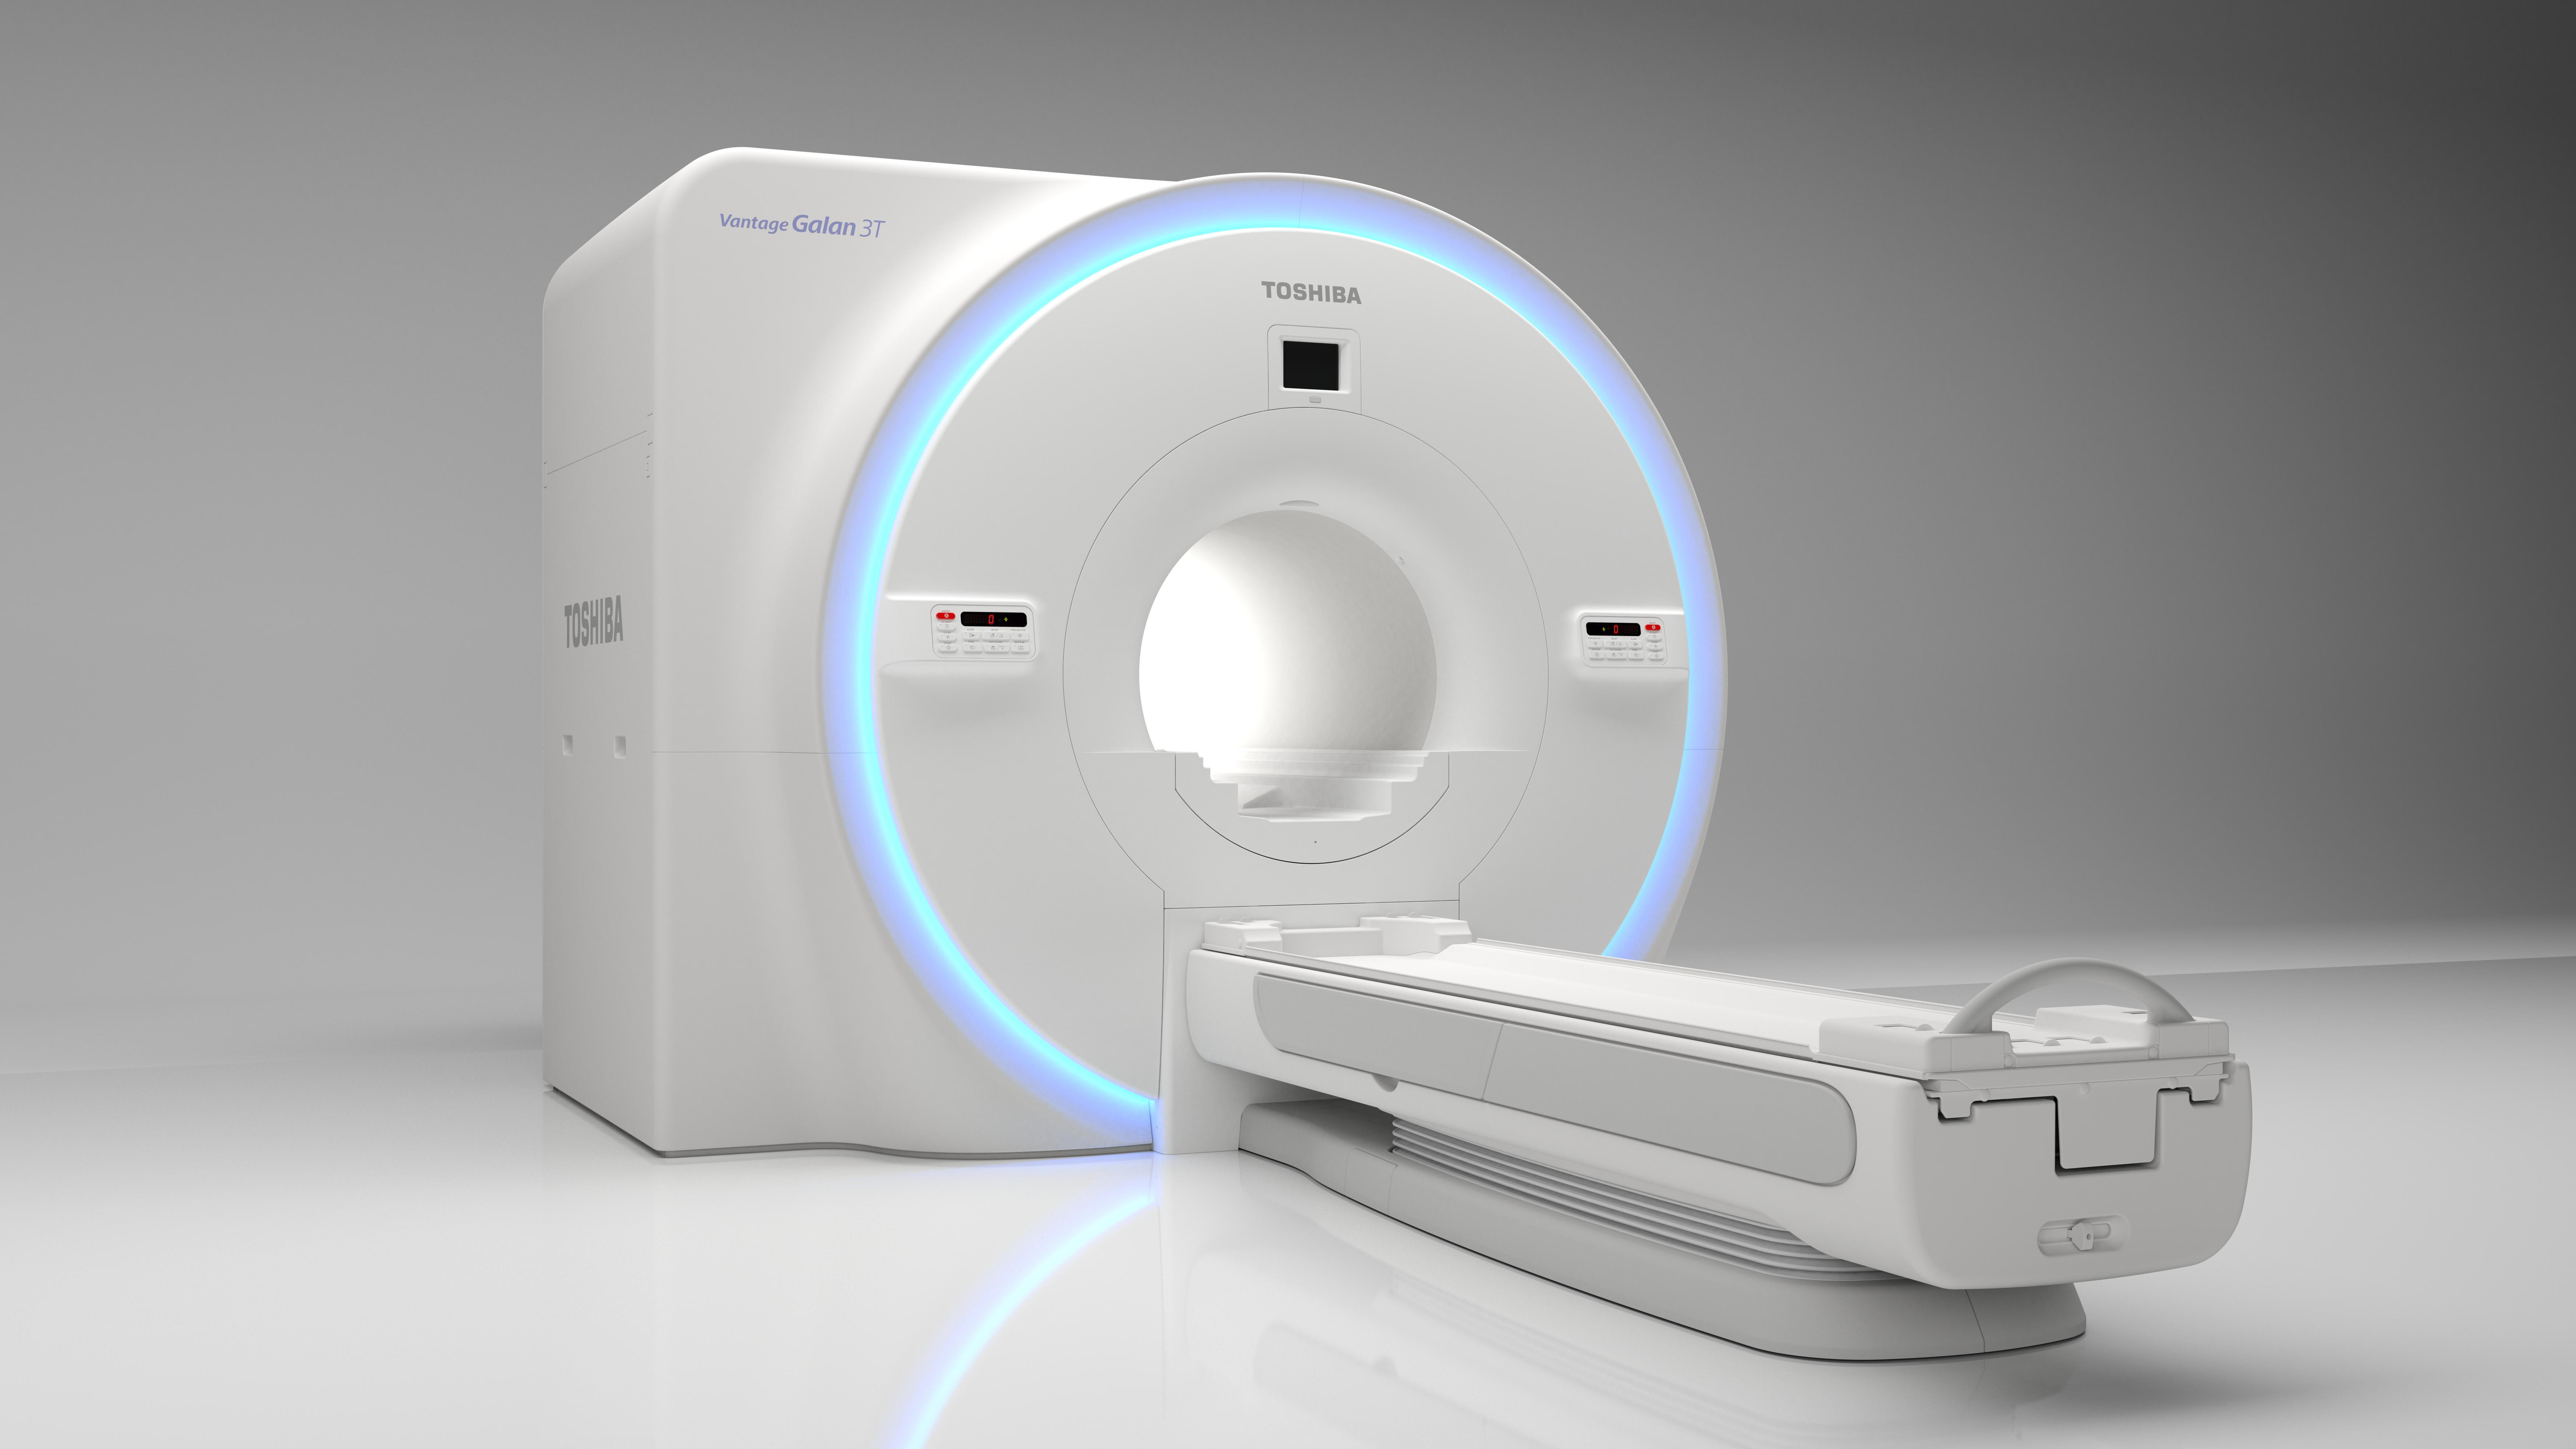 The new Vantage Galan 3T opens up 3T MR to new possibilities in routine and advanced imaging, offering high-quality 3T imaging that is fast and comfortable for patients.